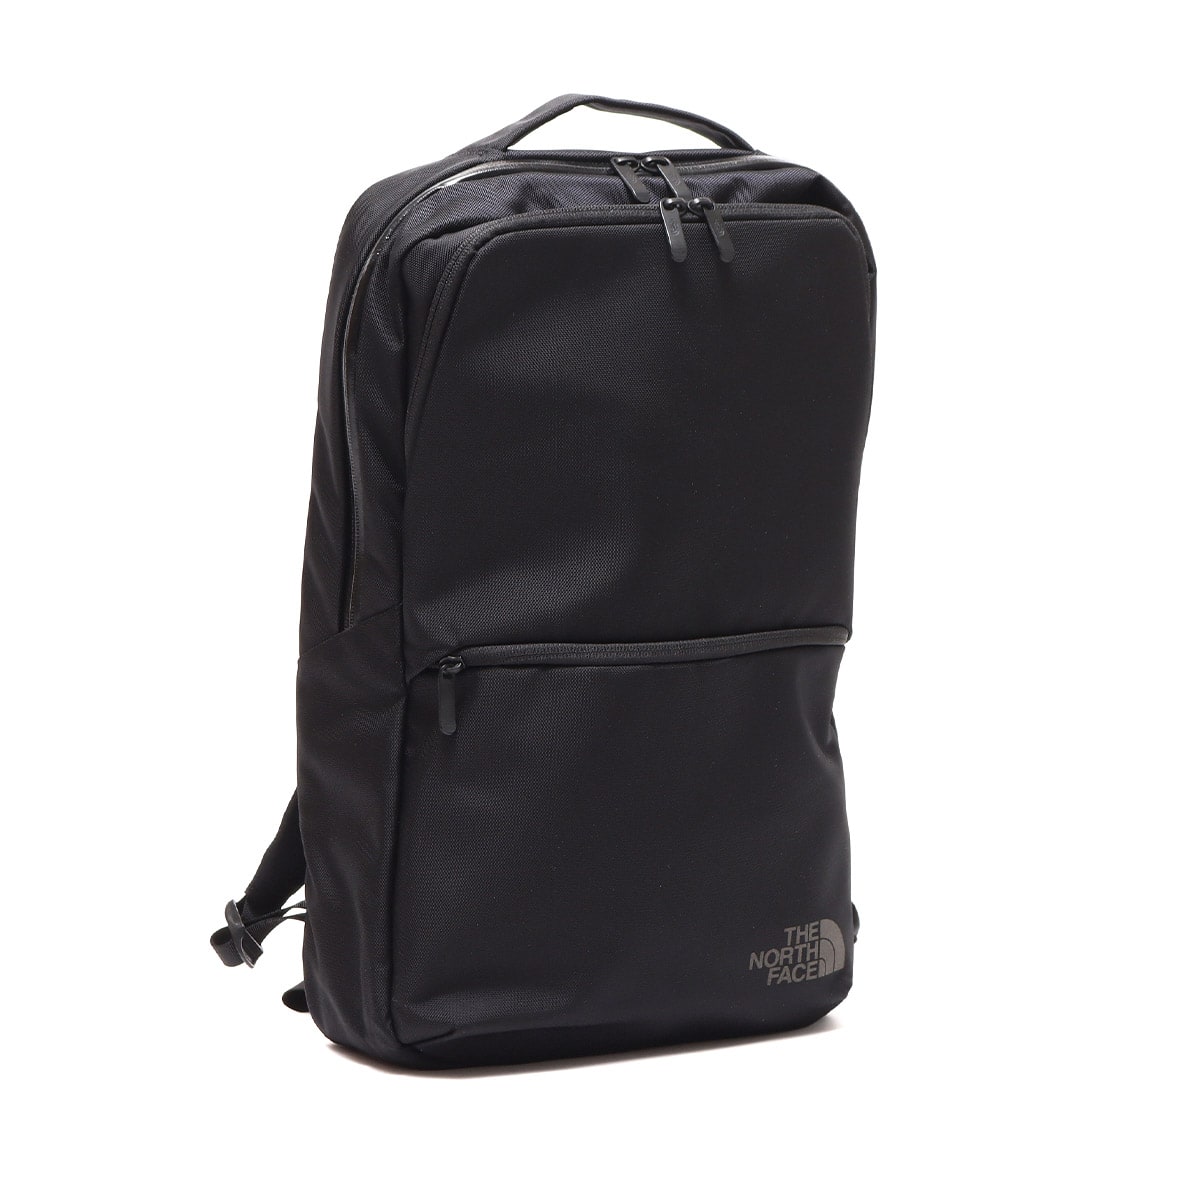 THE NORTH FACE  SHUTTLE DAYPACK SLIM